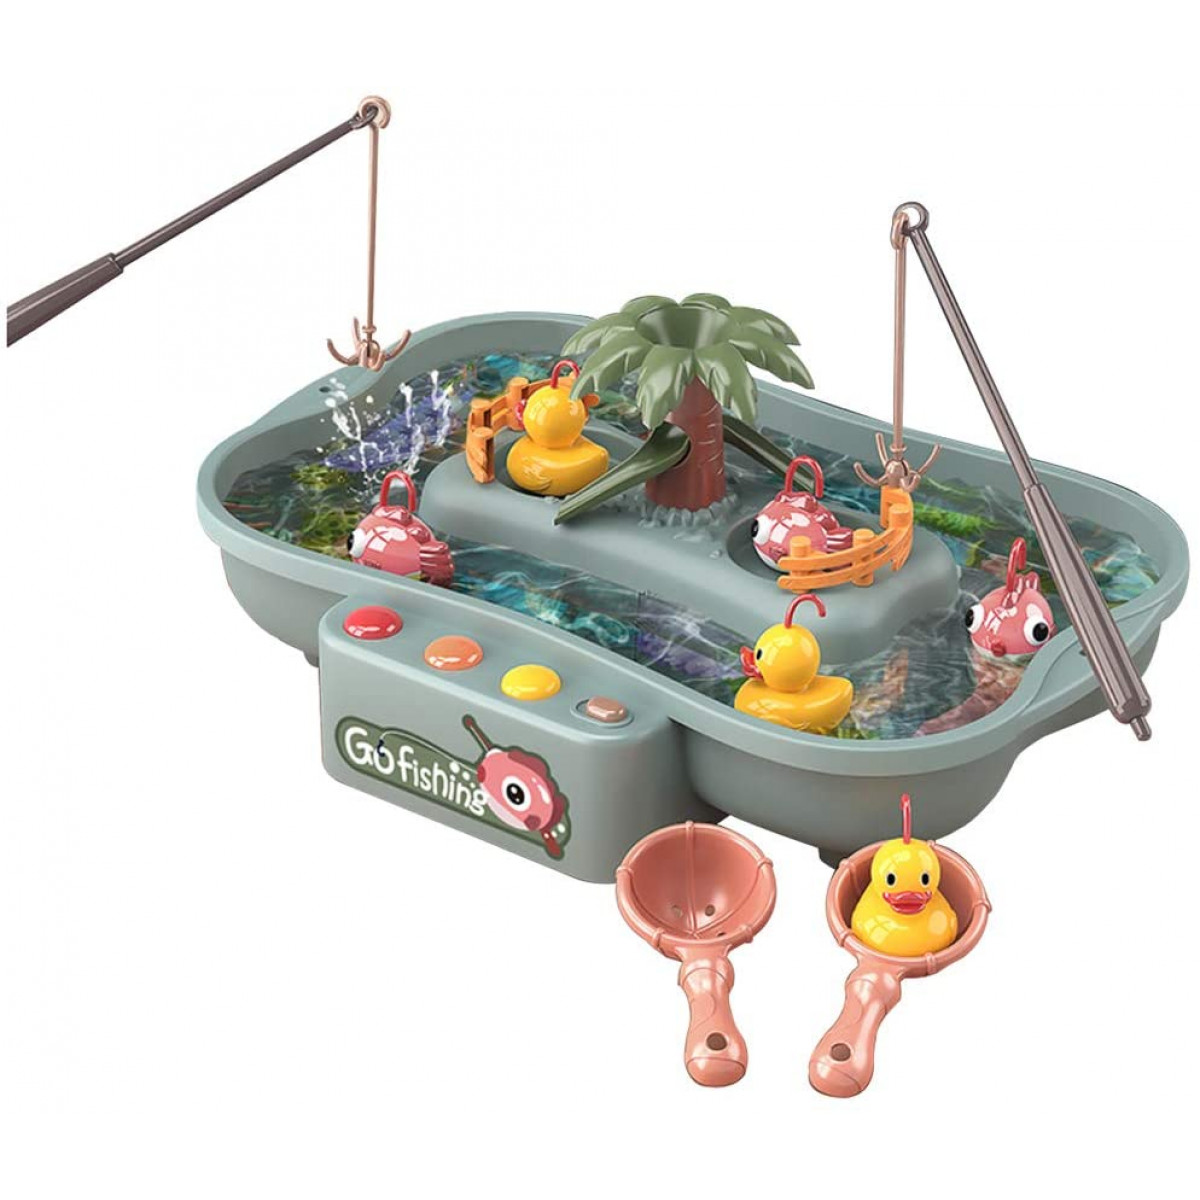 Go Fishing Game, Fishing Board Game with 6 Ducks, Water